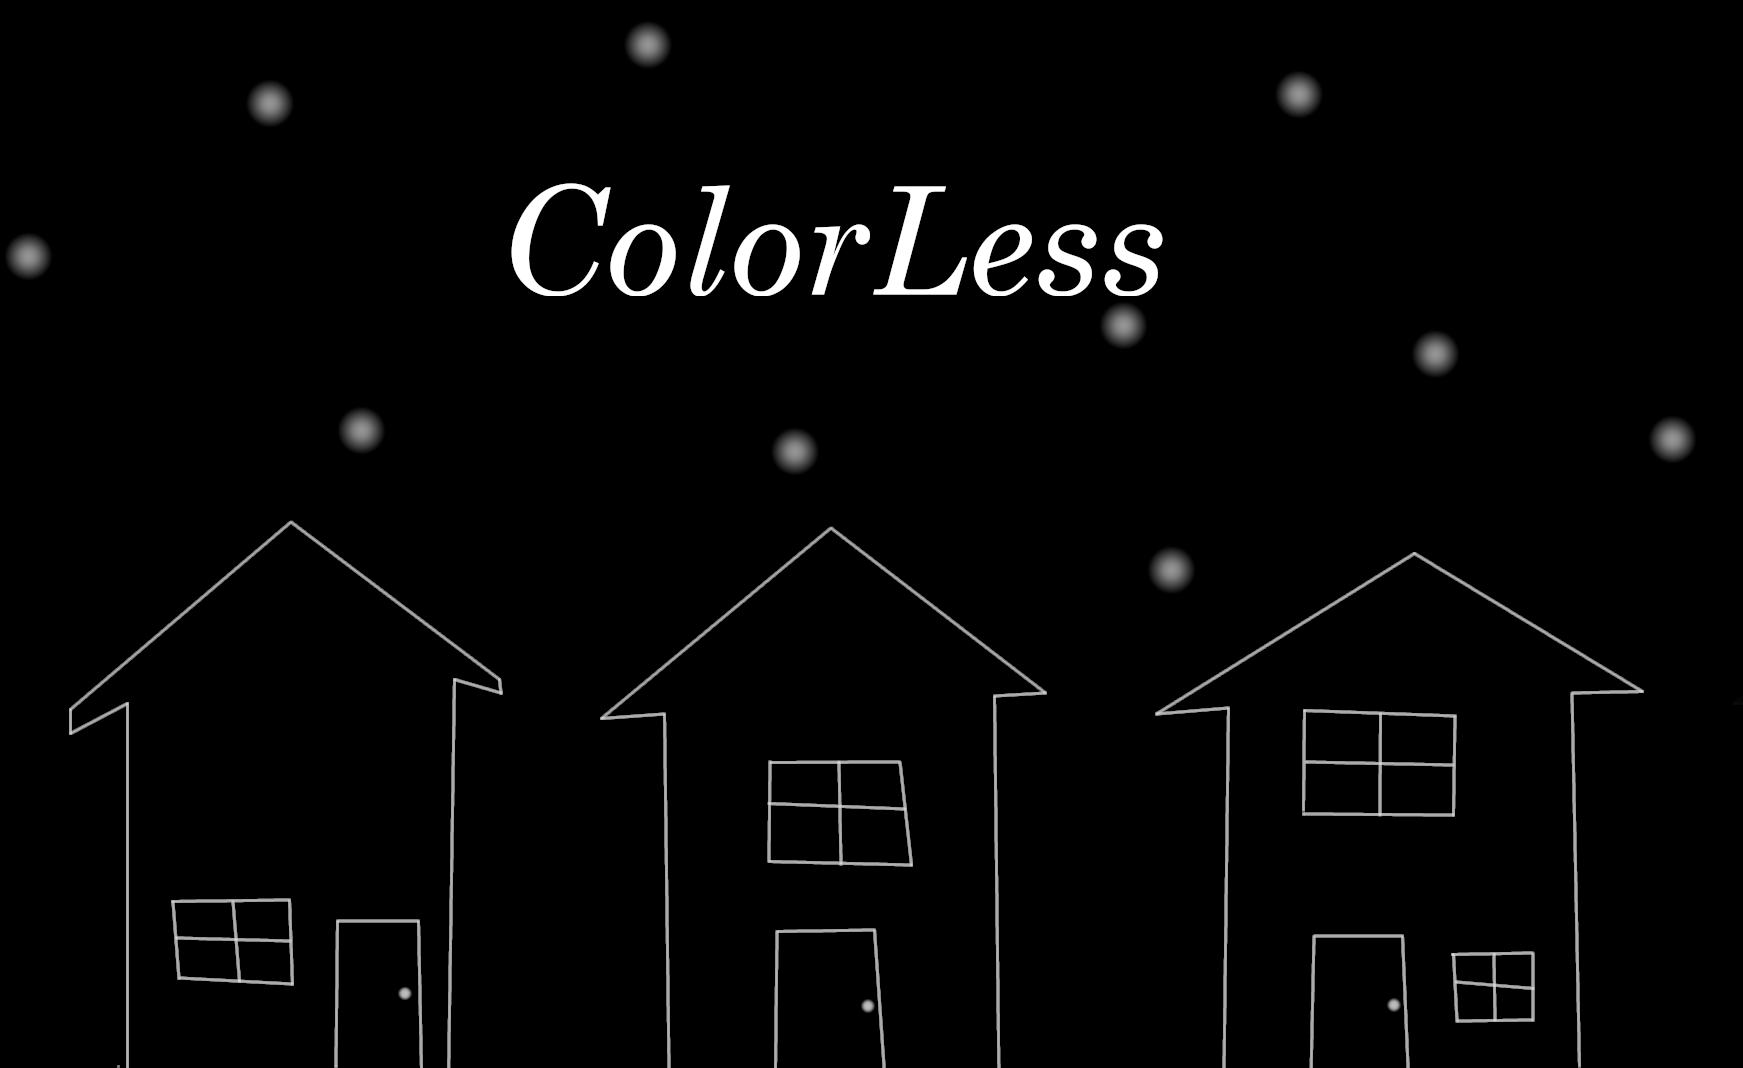 ColorLess